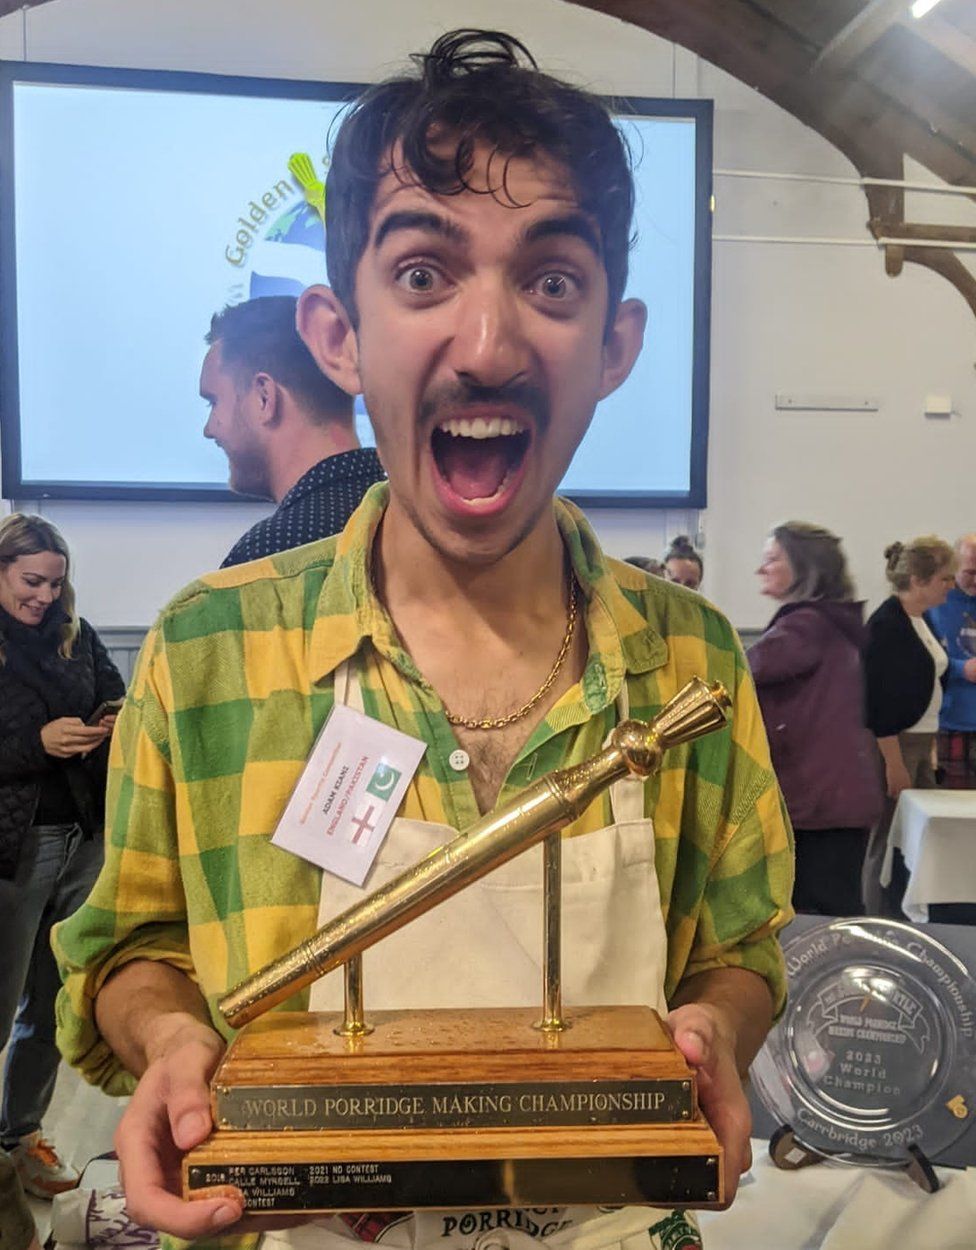 Adam Kiani holding the Golden Spurtle award with a shocked but happy look on his face